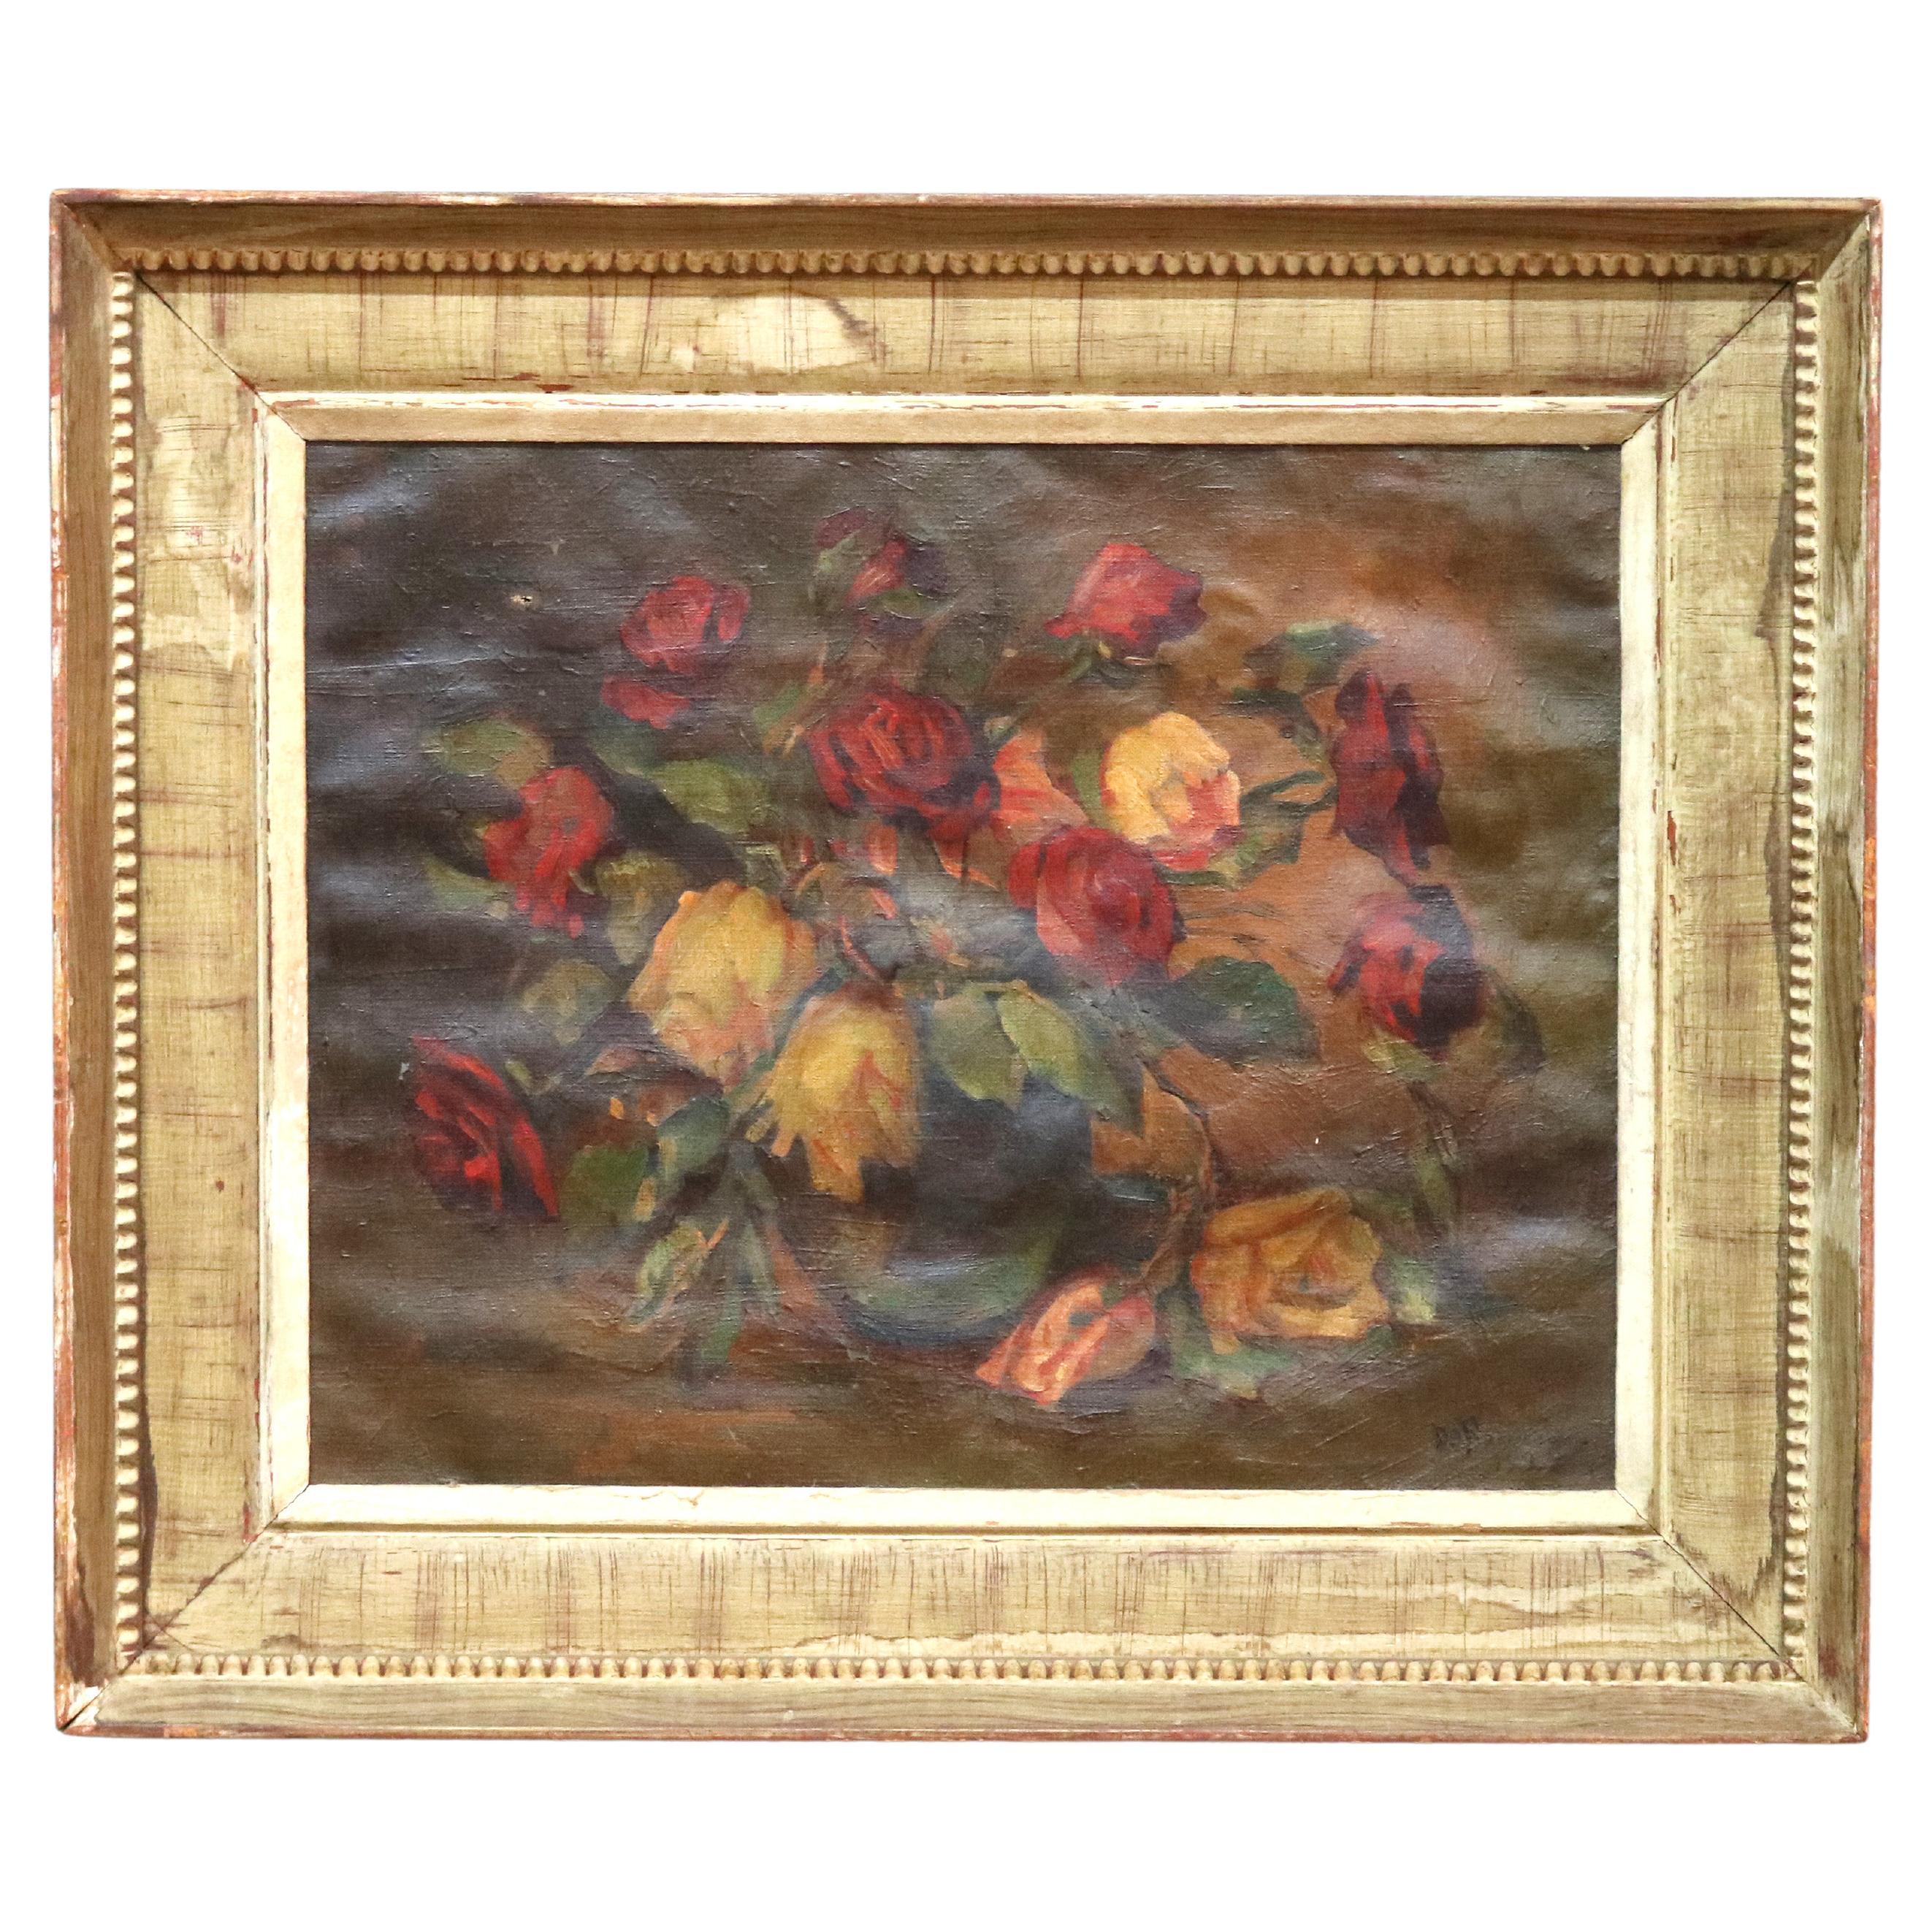 Antique Floral Still Life Painting of Roses Signed DeFrancisco, 1925